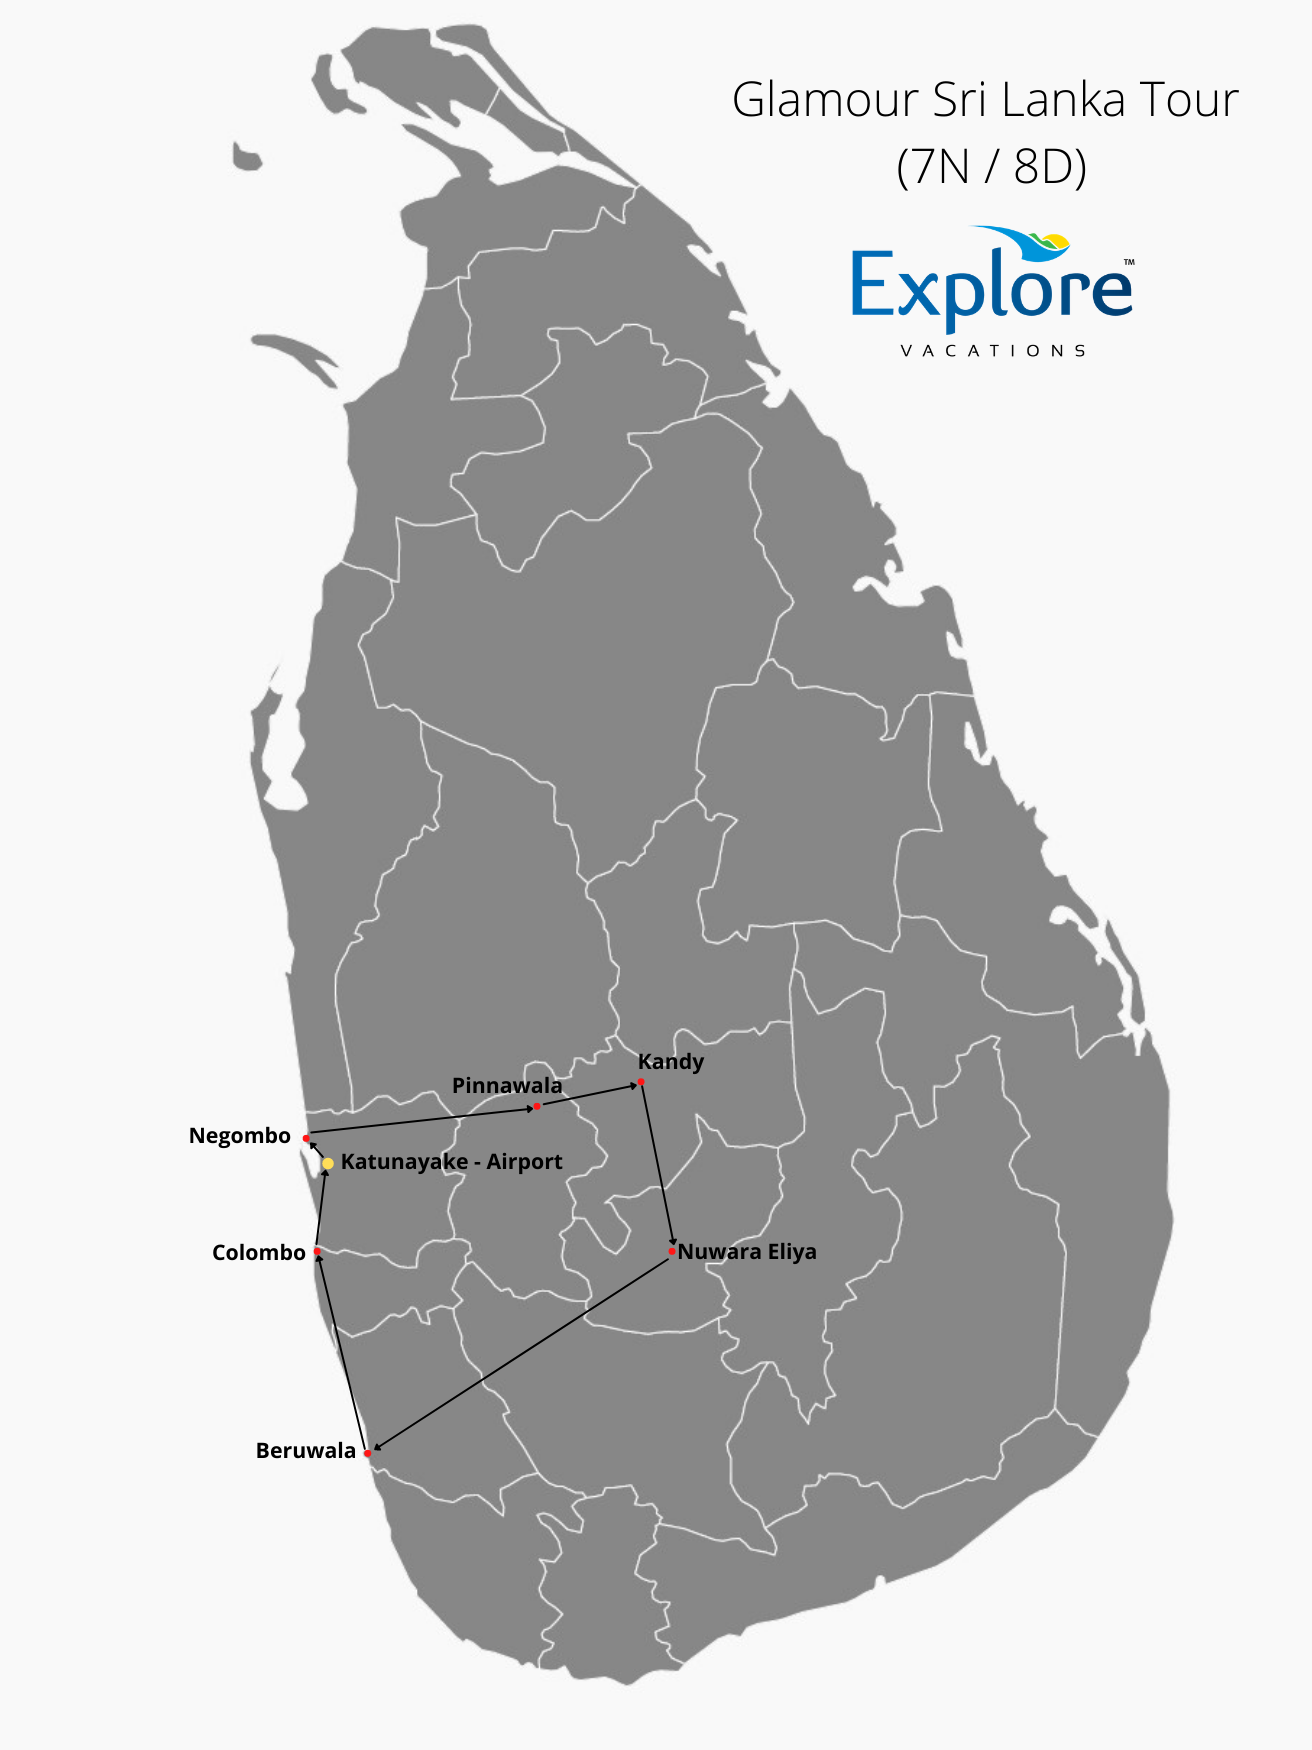 Glamour Sri Lanka Tour Map by Explore Vacations